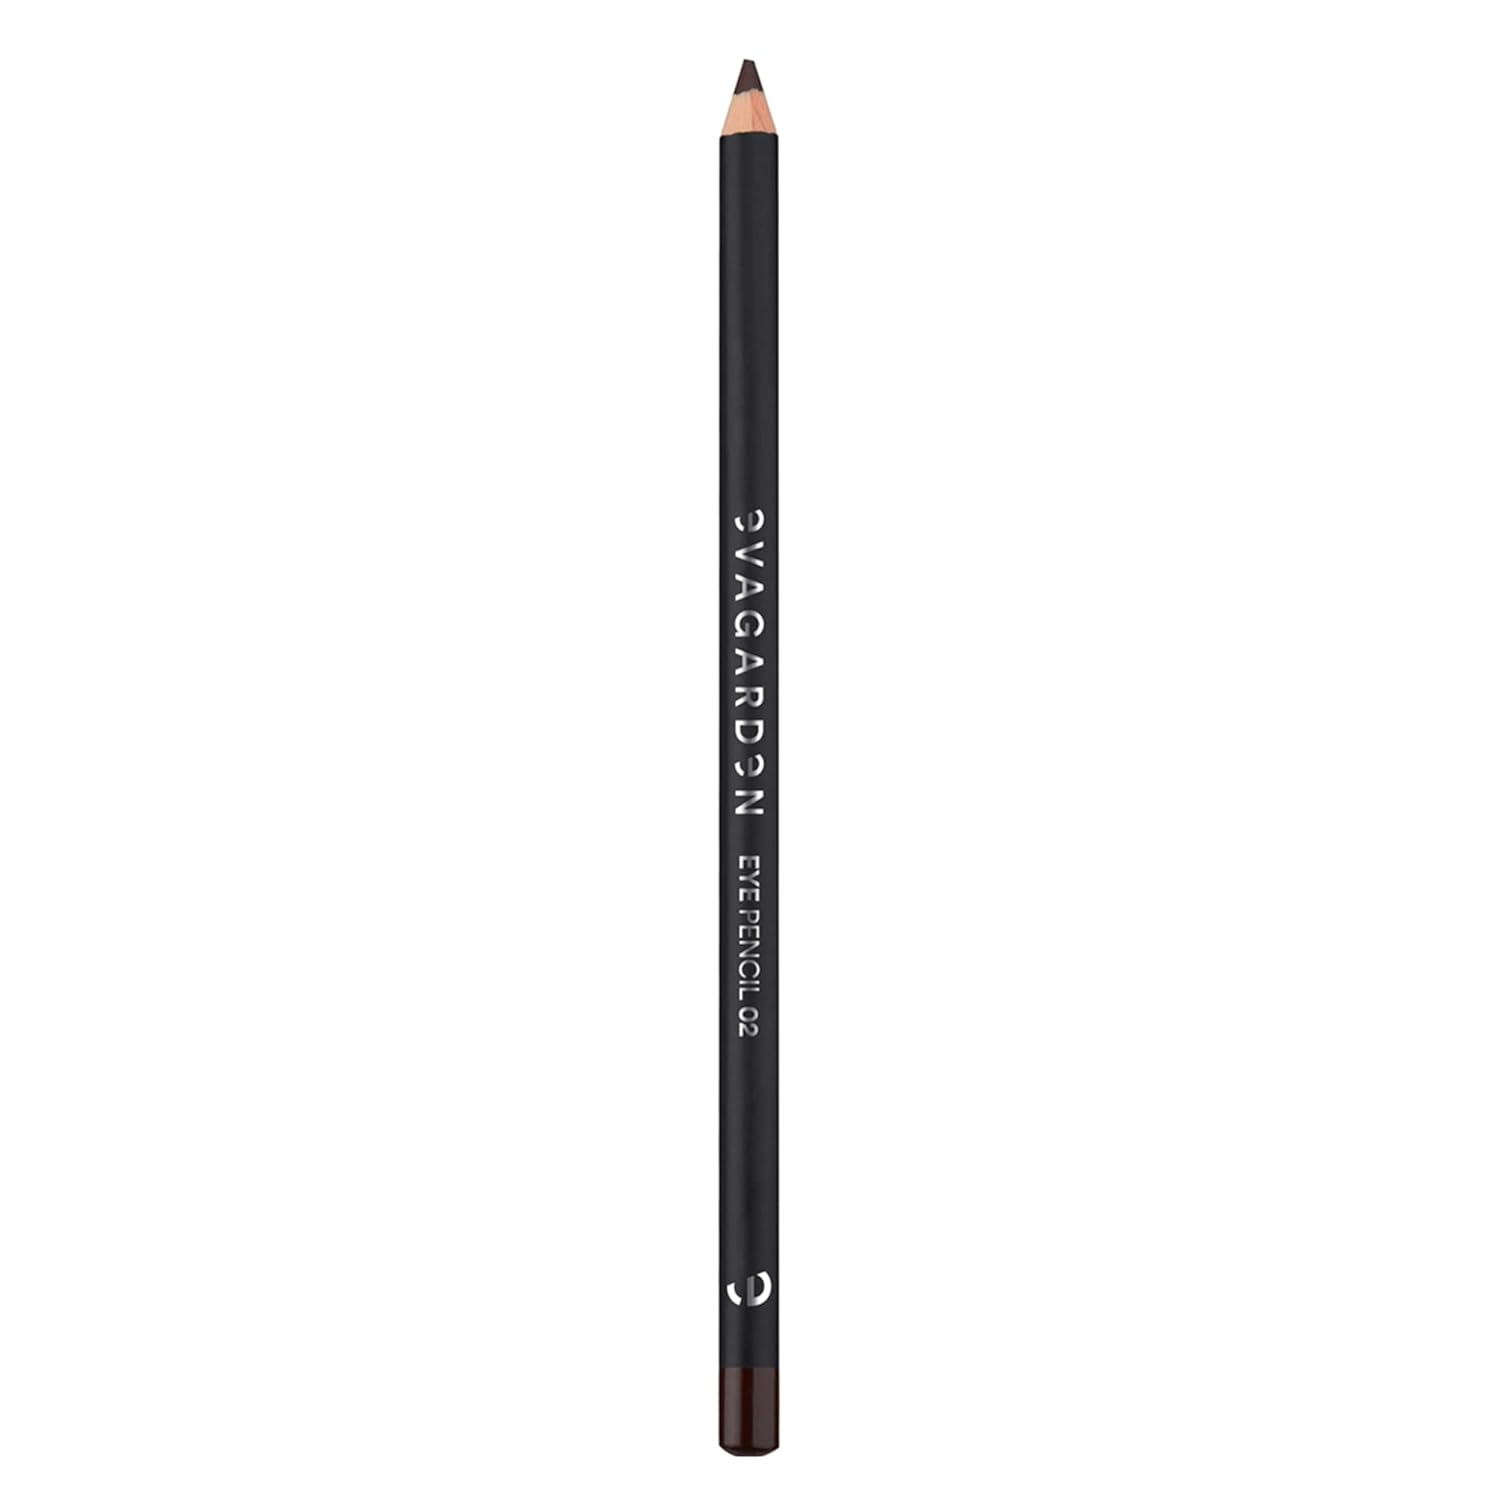 EVAGARDEN Long Lasting Eye Pencil - Delivers Saturated Color with Pigmented Formula - Intensifies Your Makeup Appearance - Easy Application - With Vitamin E Properties - 02 Brown - 0.1